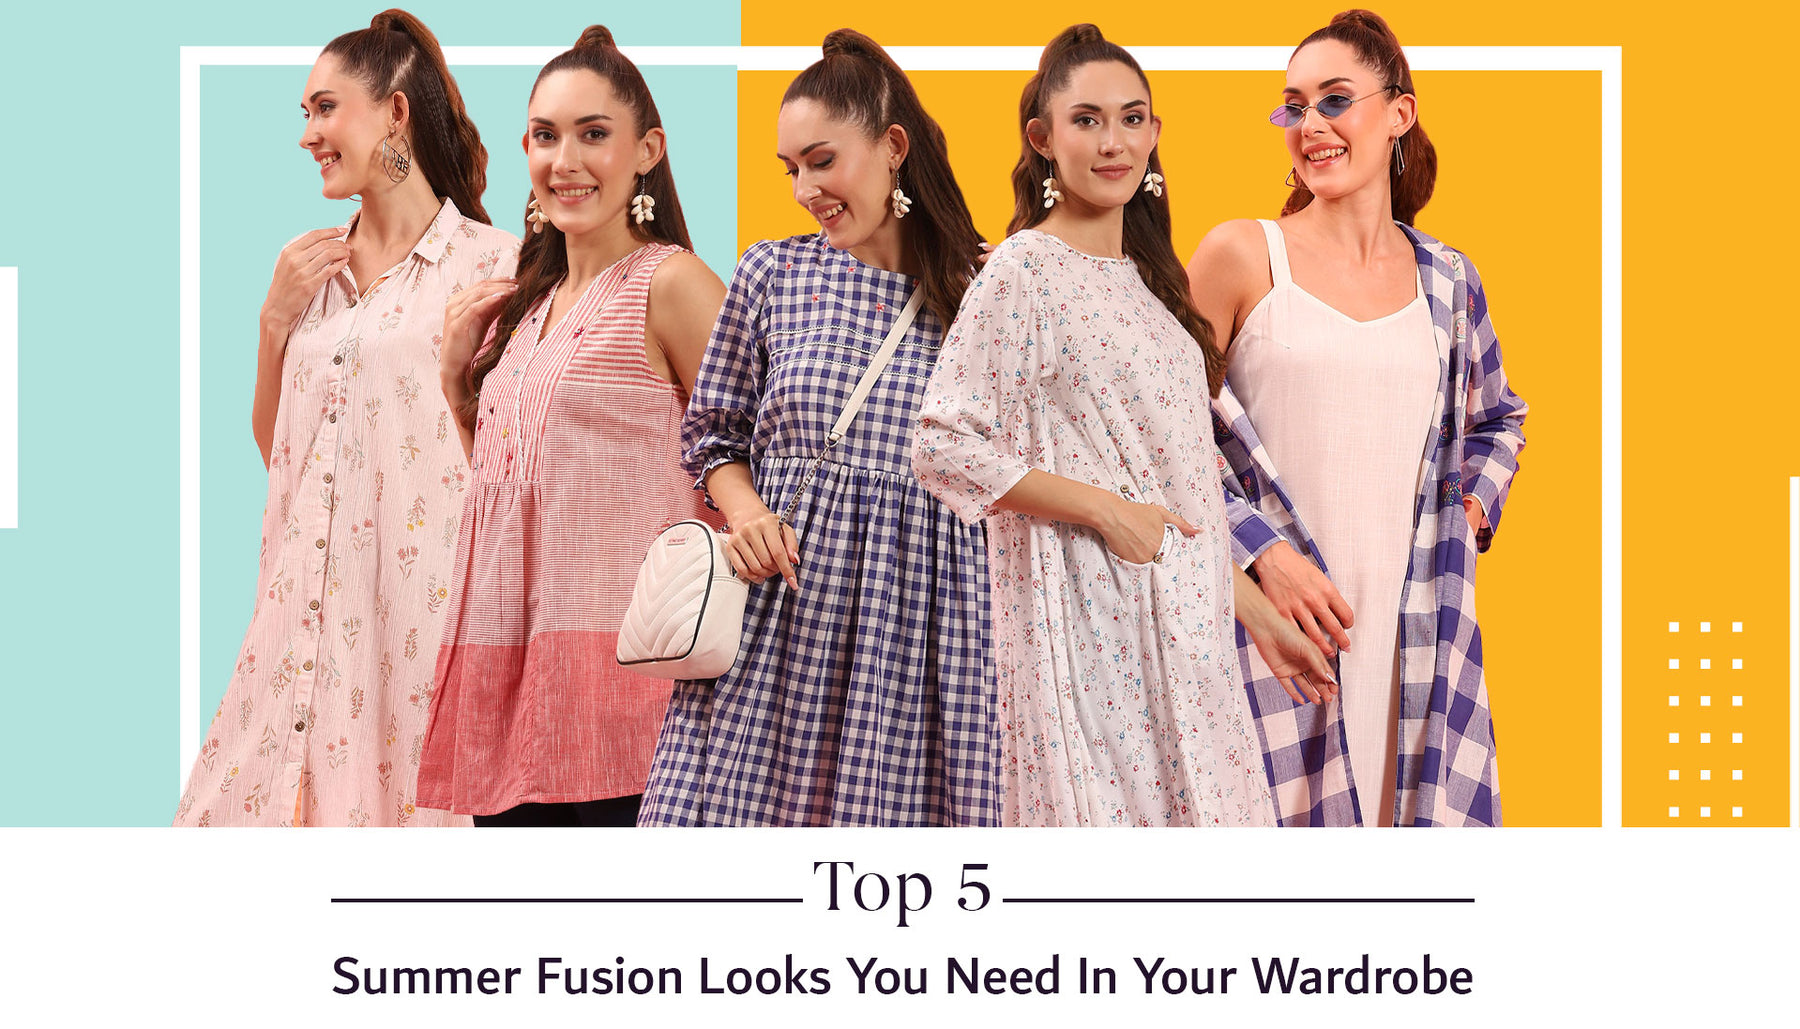 Top 5 Summer Fusion Looks You Need In Your Wardrobe